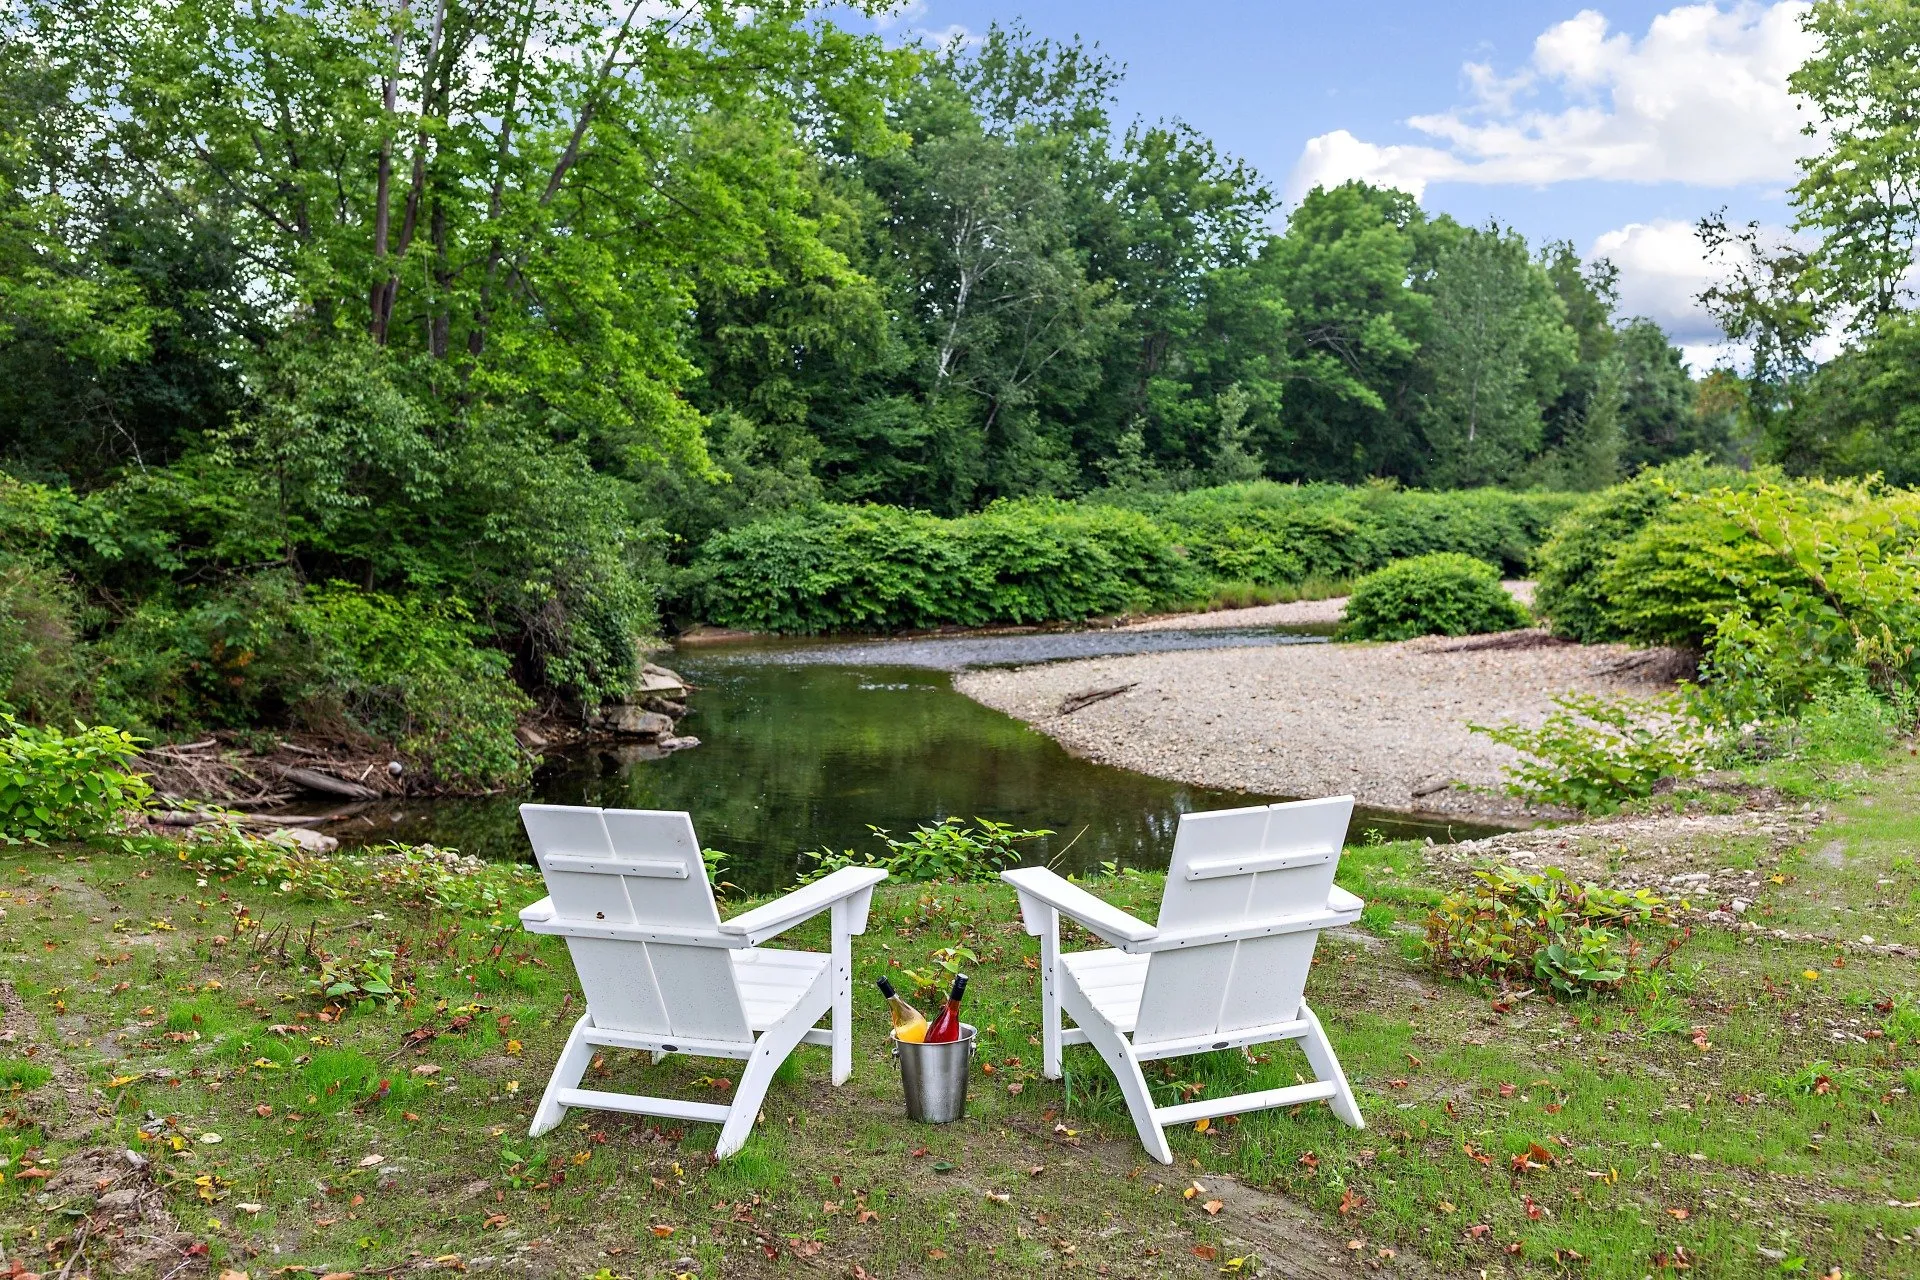 Town & Country Stowe - Adirondak Chairs by the River